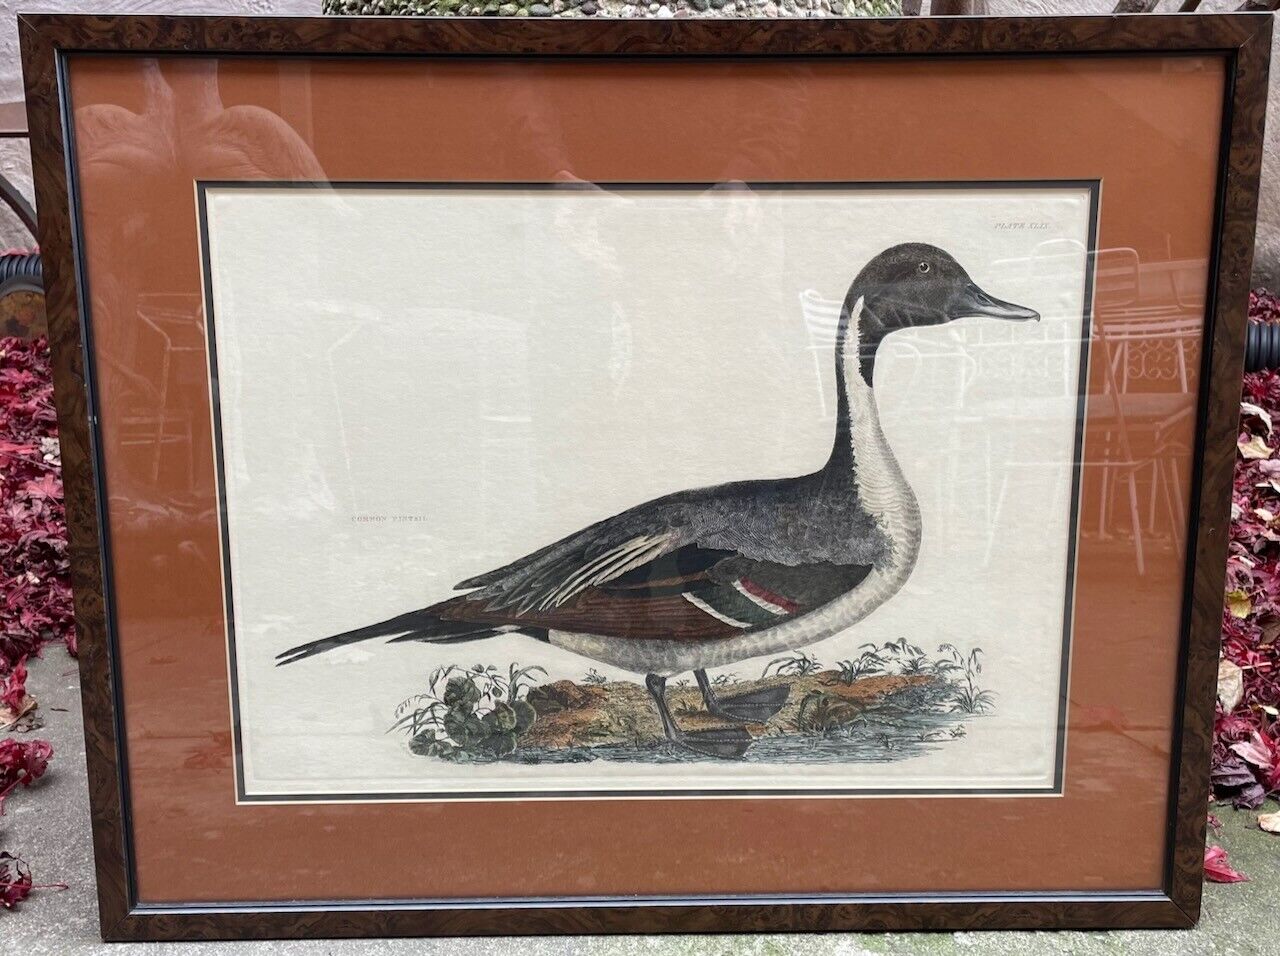 Prideaux John Selby "Common Pintail" Framed Hand-Colored Copper Engraving Без бренда